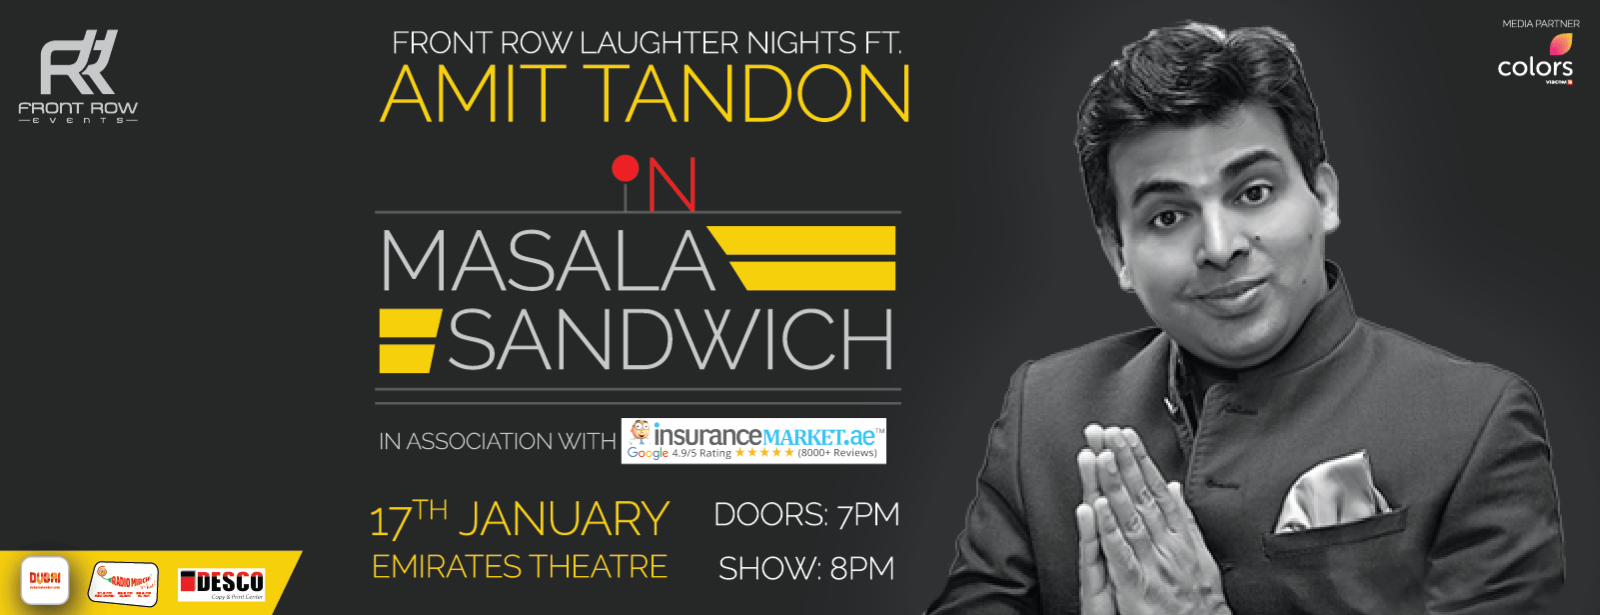 Front Row Laughter Nights ft Amit Tandon - Coming Soon in UAE